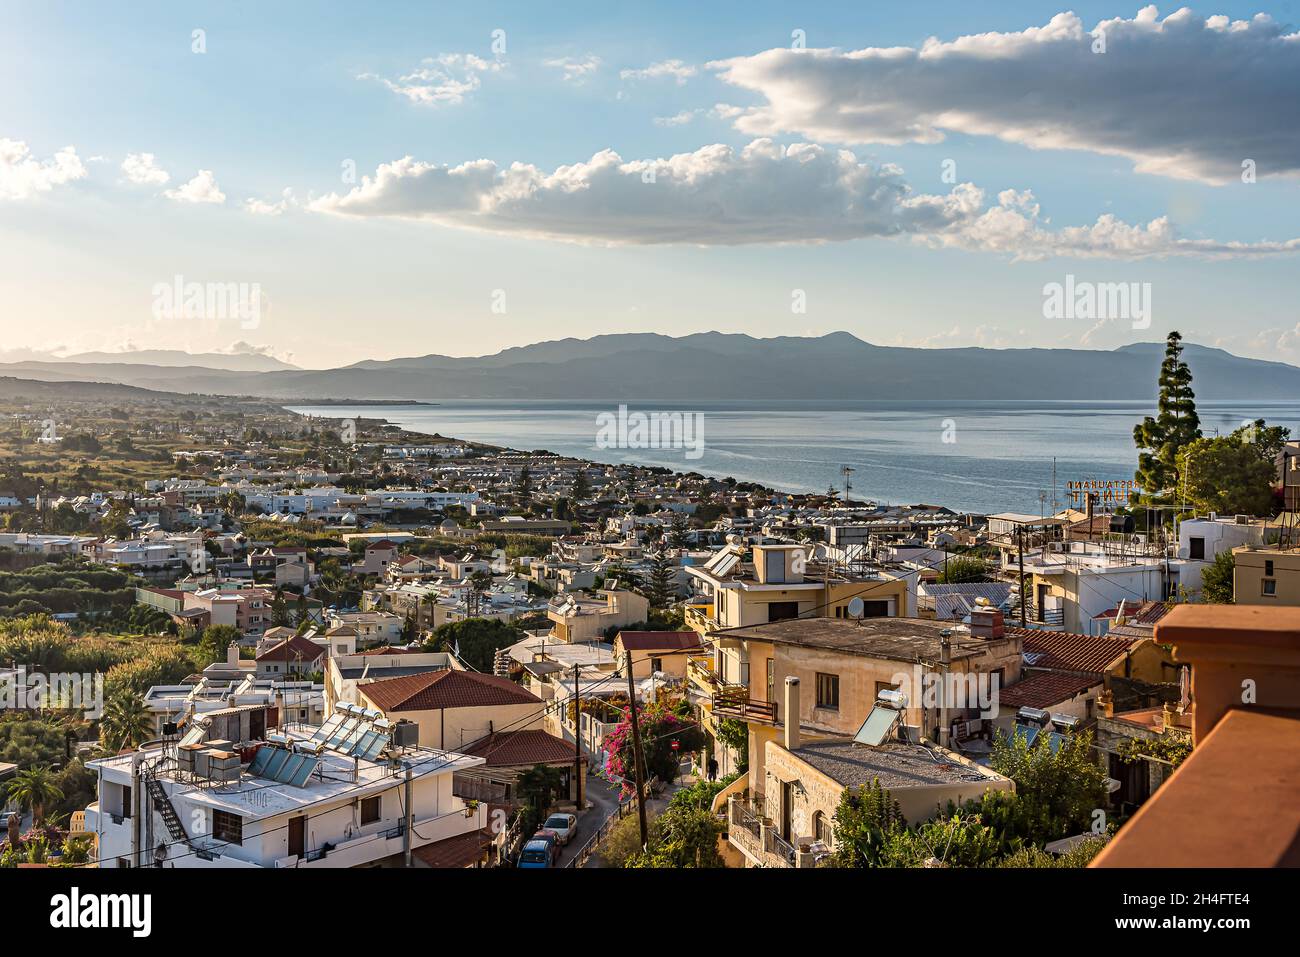 Platanias village and bay from a high viewpoint, Crete, Greece, October 10, 2021 Stock Photo